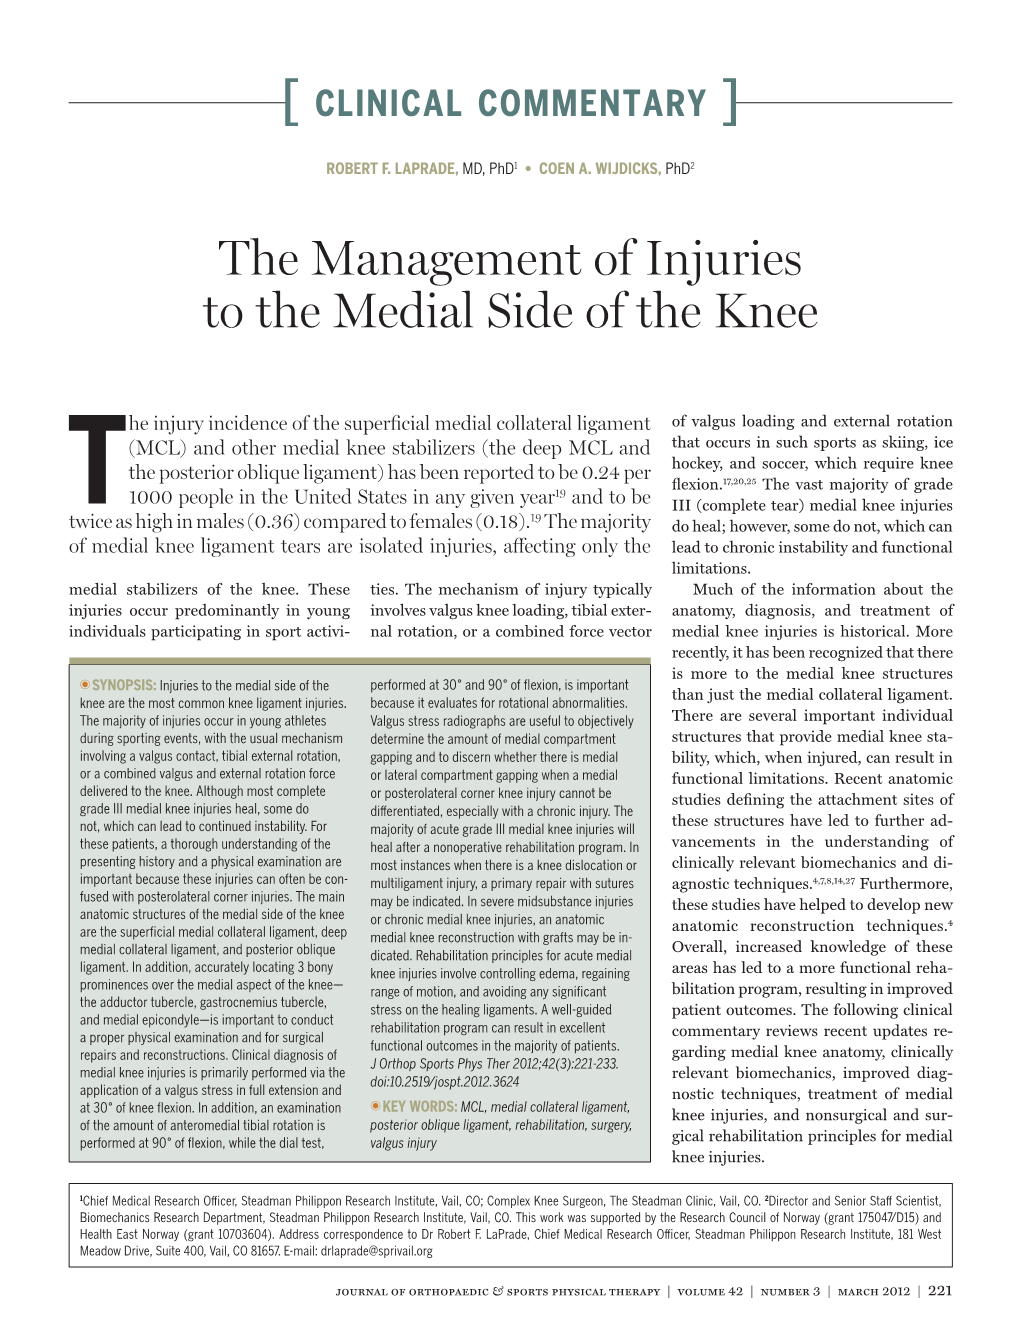 The Management of Injuries to the Medial Side of the Knee